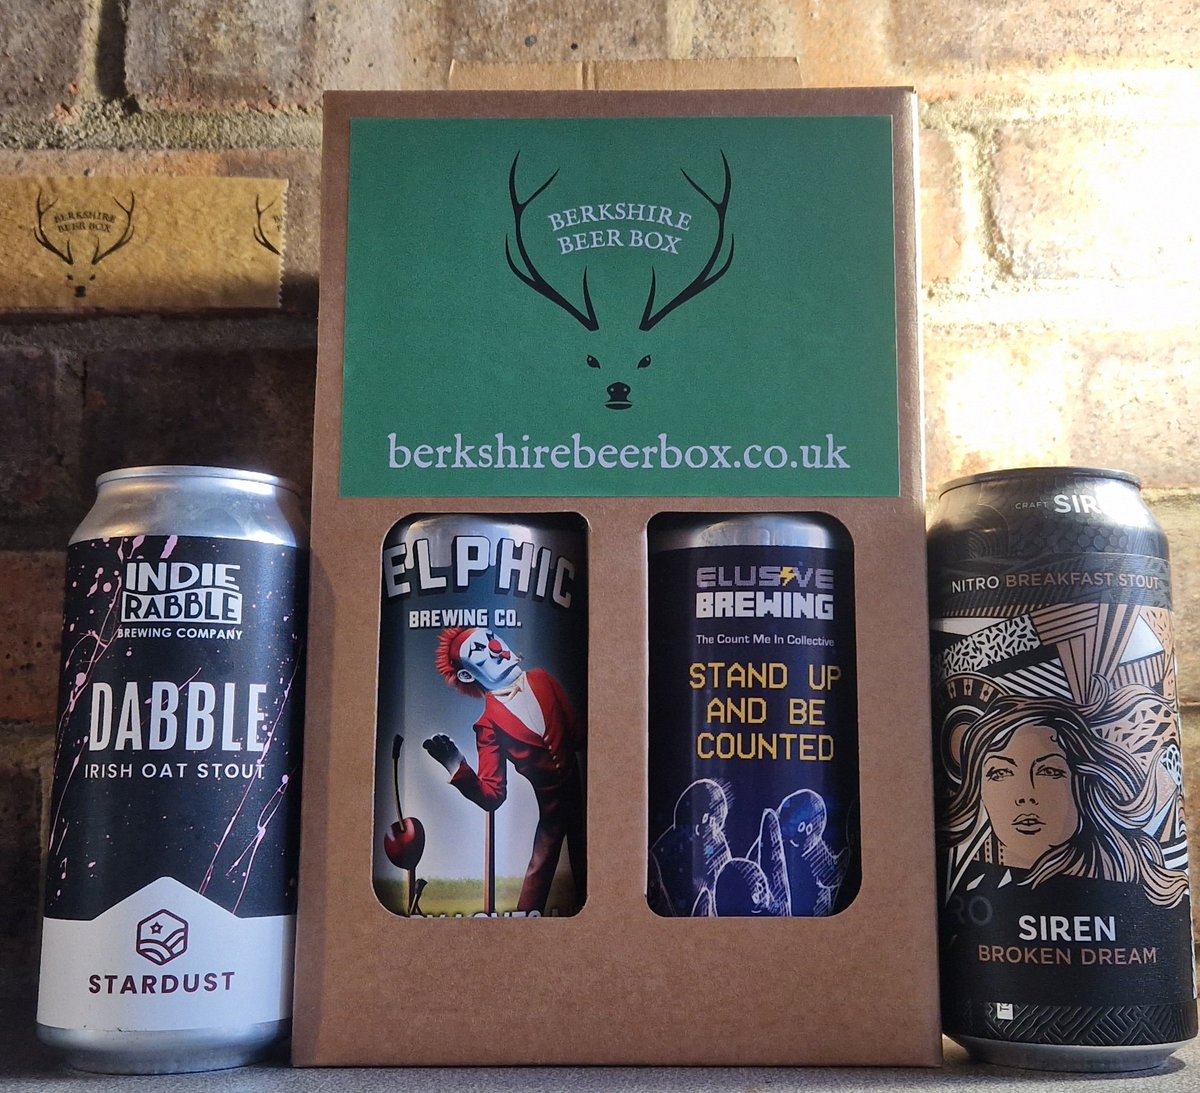 DARK BEER BOX! In shop now! The perfect gift for that darker beer lover we all know! berkshirebeerbox.co.uk/shop #Berkshire #Beer #Christmas